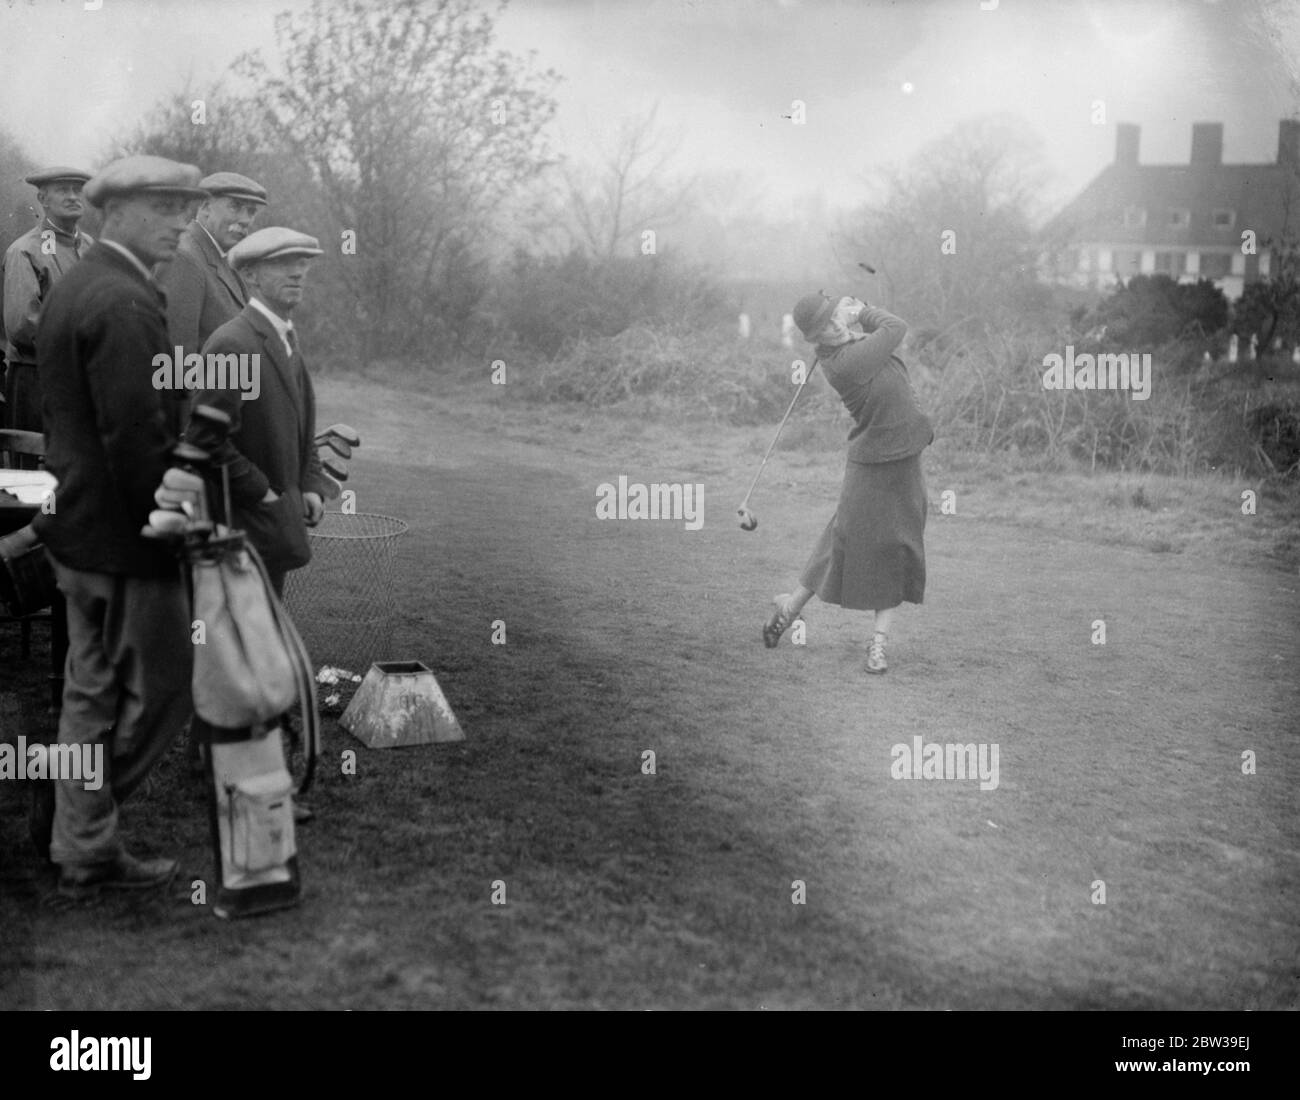 Lady Astor plays in first round of Parliamentary Golf Handicap at Walton Heath . The Prince of Wales , Lady Astor and 120 members of Parliament , took part in the first round of the Parliamentary Golf Handicap which was played on the Walton Heath course , Surrey . Photo shows , Lady Astor driving from the 1st tee at Walton Heath . 28 March 1933 Stock Photo